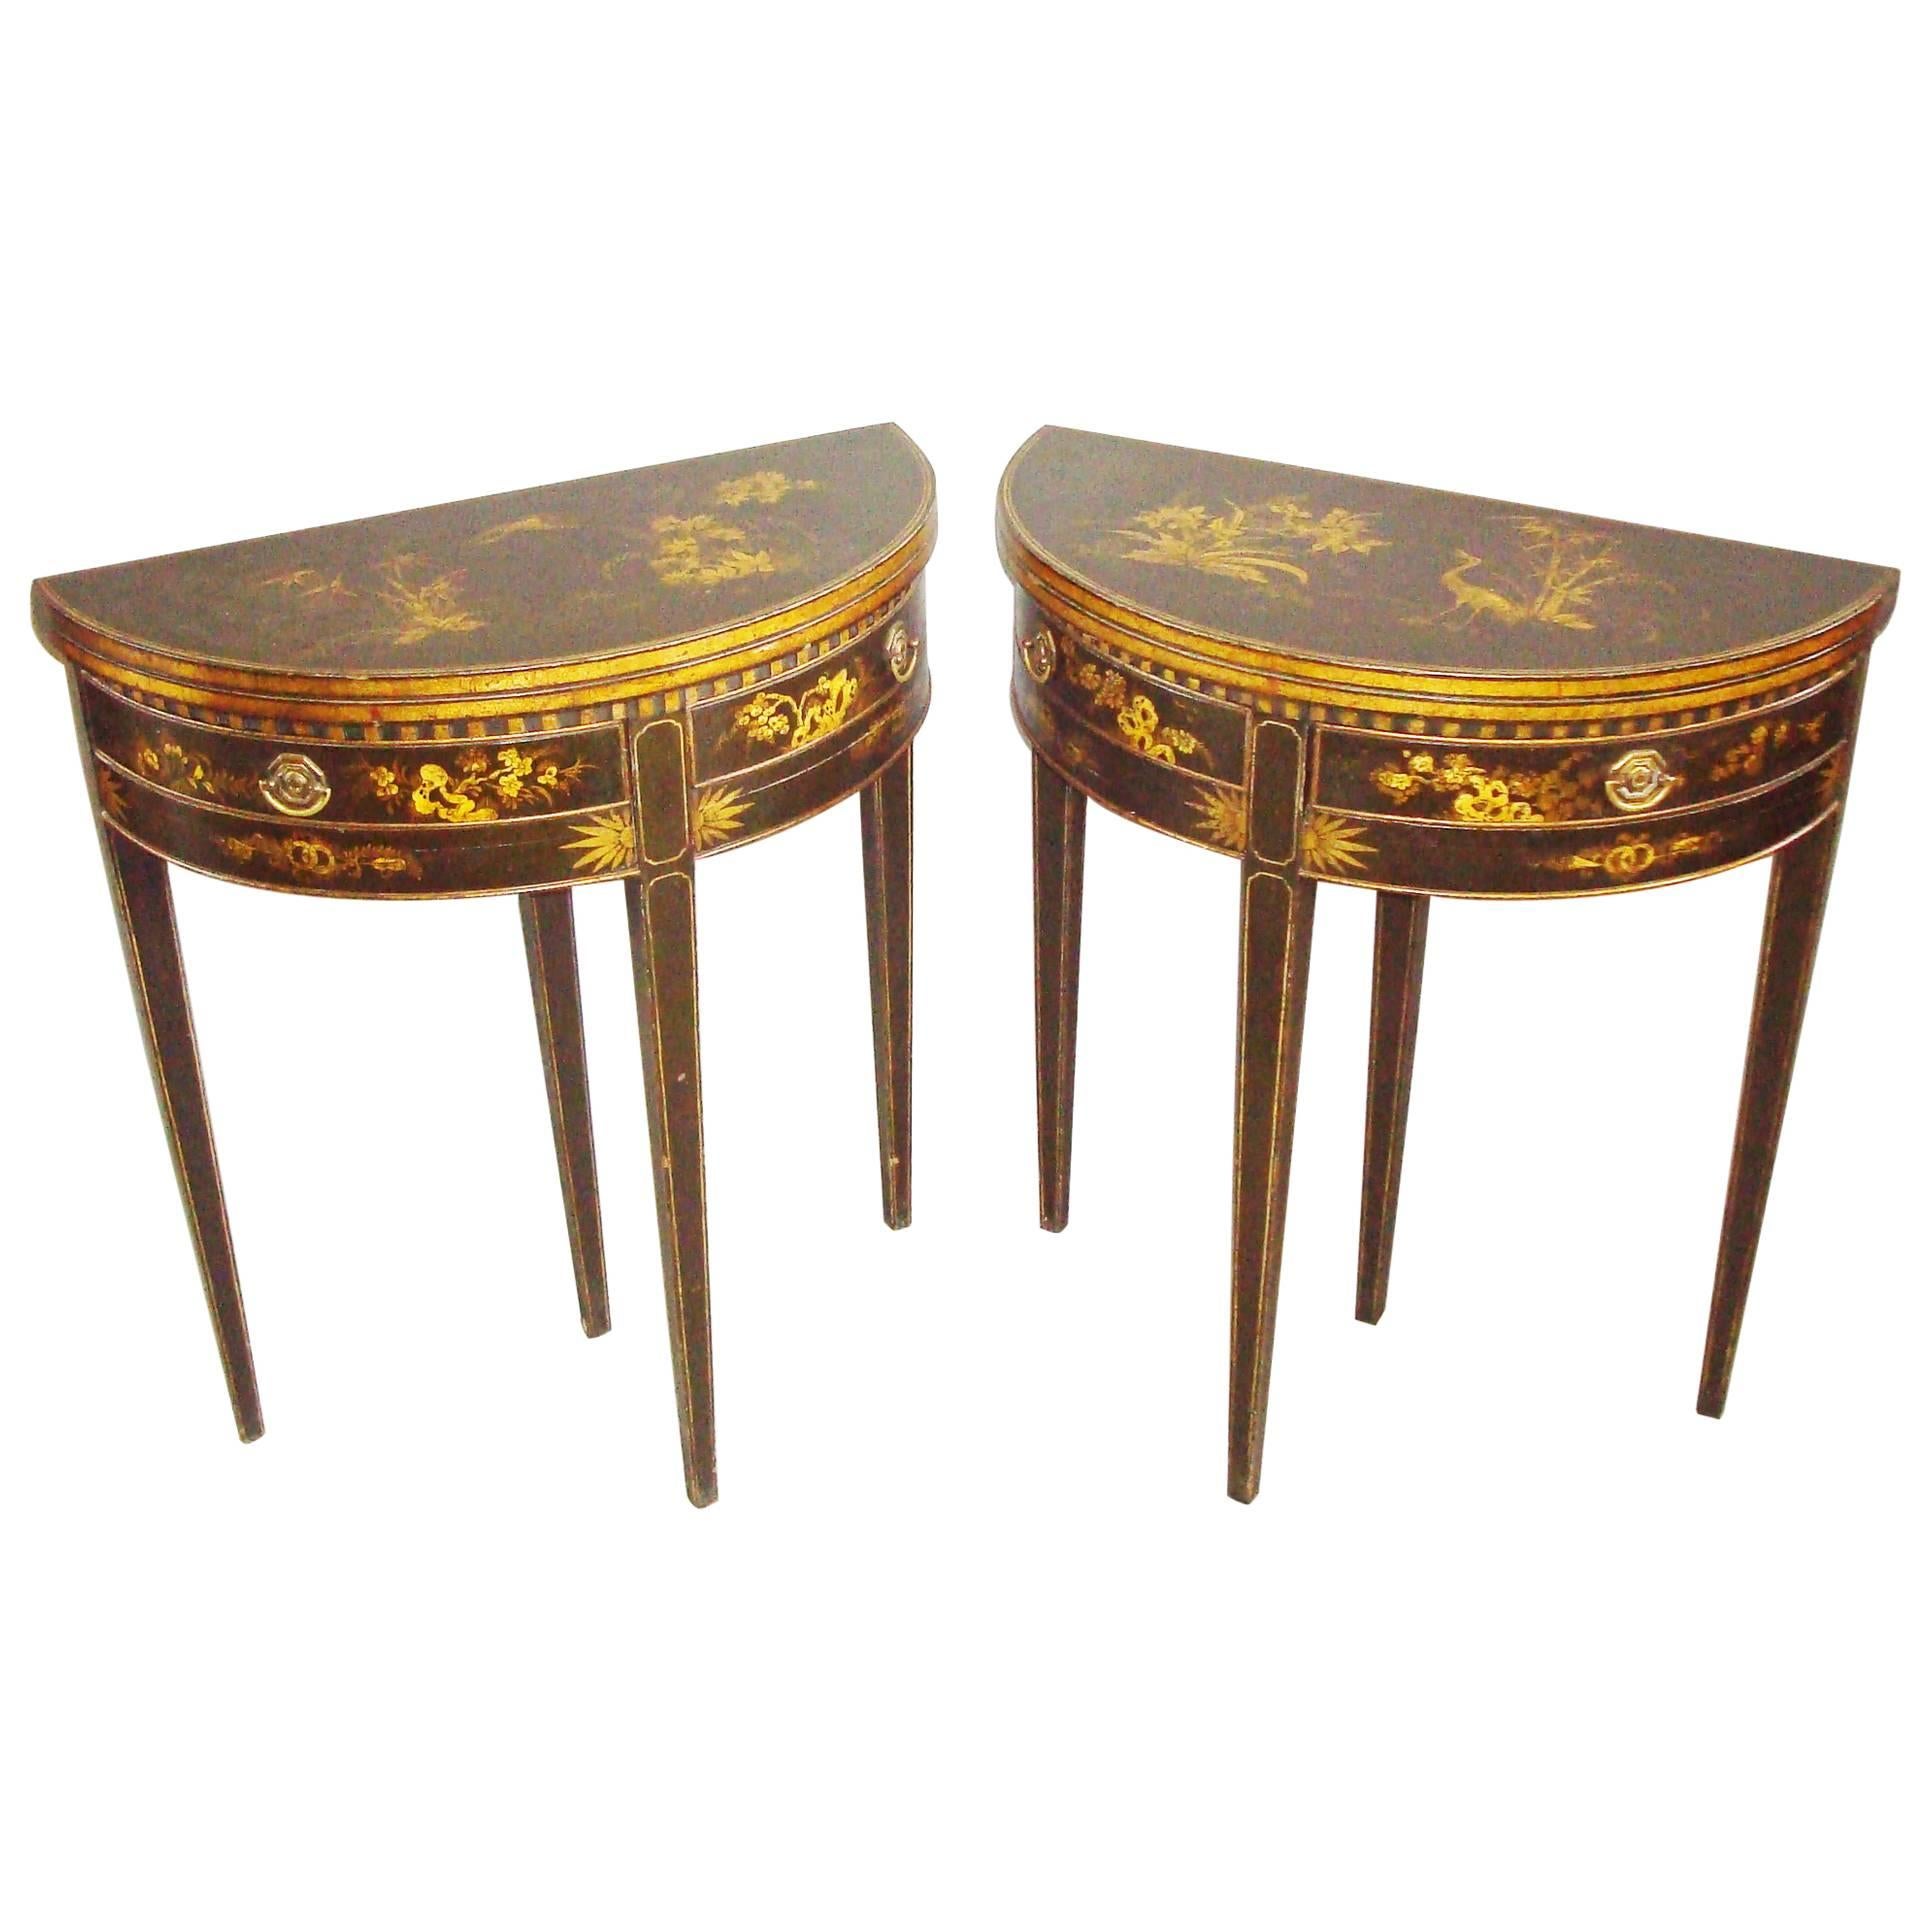 19th Century Pair of Chinoiserie Demilune Card Tables